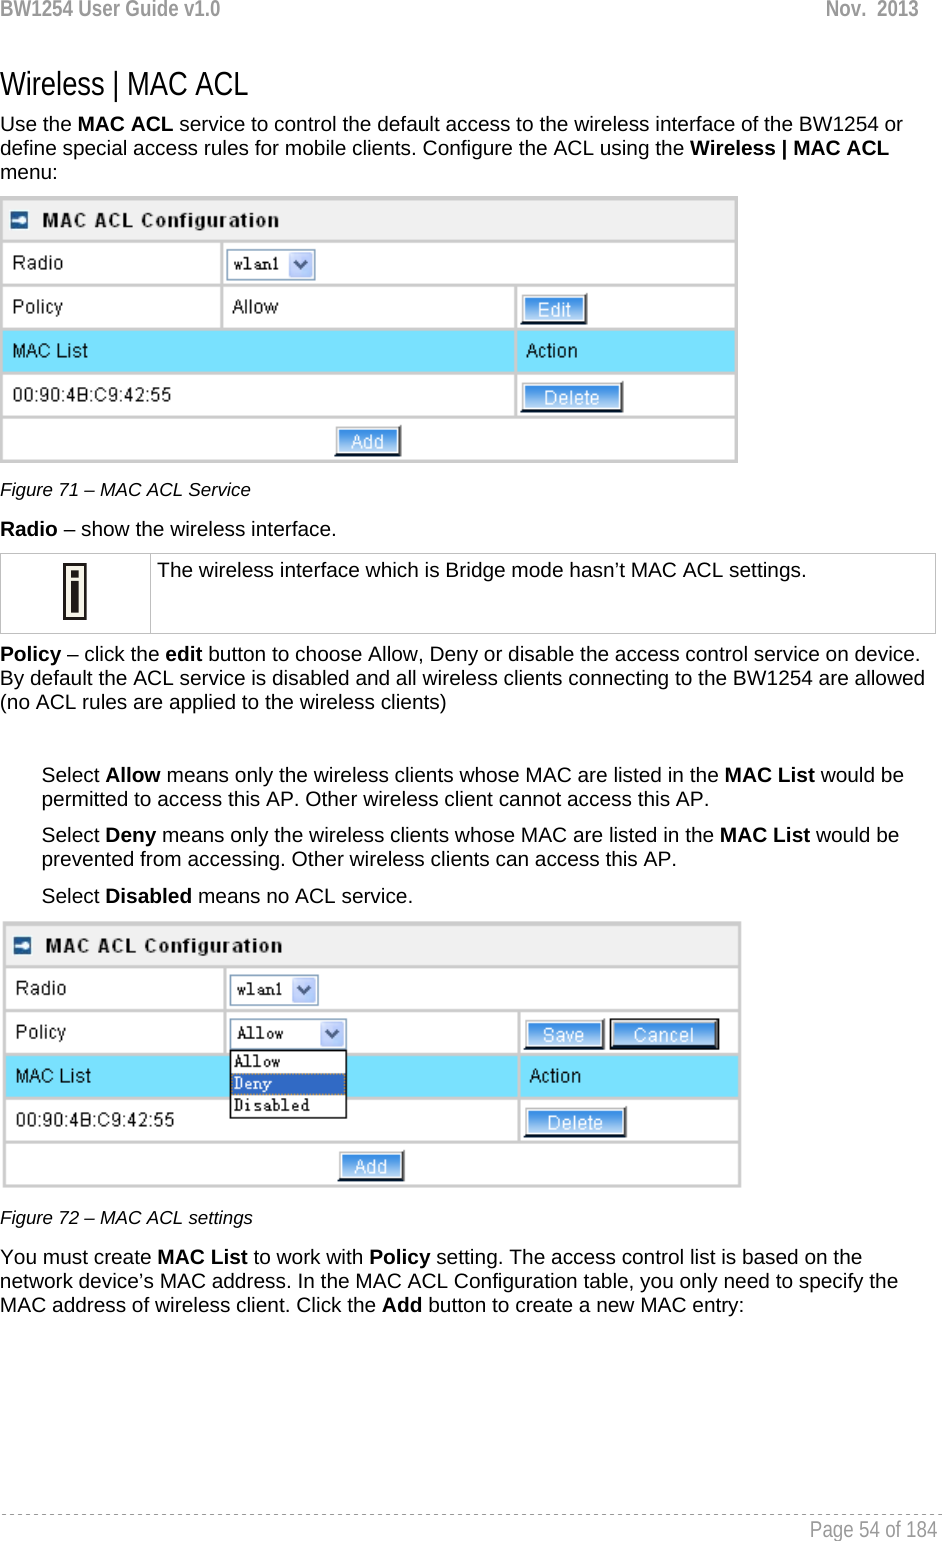 BW1254 User Guide v1.0  Nov.  2013     Page 54 of 184   Wireless | MAC ACL Use the MAC ACL service to control the default access to the wireless interface of the BW1254 or define special access rules for mobile clients. Configure the ACL using the Wireless | MAC ACL menu:  Figure 71 – MAC ACL Service Radio – show the wireless interface.  The wireless interface which is Bridge mode hasn’t MAC ACL settings. Policy – click the edit button to choose Allow, Deny or disable the access control service on device. By default the ACL service is disabled and all wireless clients connecting to the BW1254 are allowed (no ACL rules are applied to the wireless clients)  Select Allow means only the wireless clients whose MAC are listed in the MAC List would be permitted to access this AP. Other wireless client cannot access this AP. Select Deny means only the wireless clients whose MAC are listed in the MAC List would be prevented from accessing. Other wireless clients can access this AP. Select Disabled means no ACL service.  Figure 72 – MAC ACL settings You must create MAC List to work with Policy setting. The access control list is based on the network device’s MAC address. In the MAC ACL Configuration table, you only need to specify the MAC address of wireless client. Click the Add button to create a new MAC entry: 